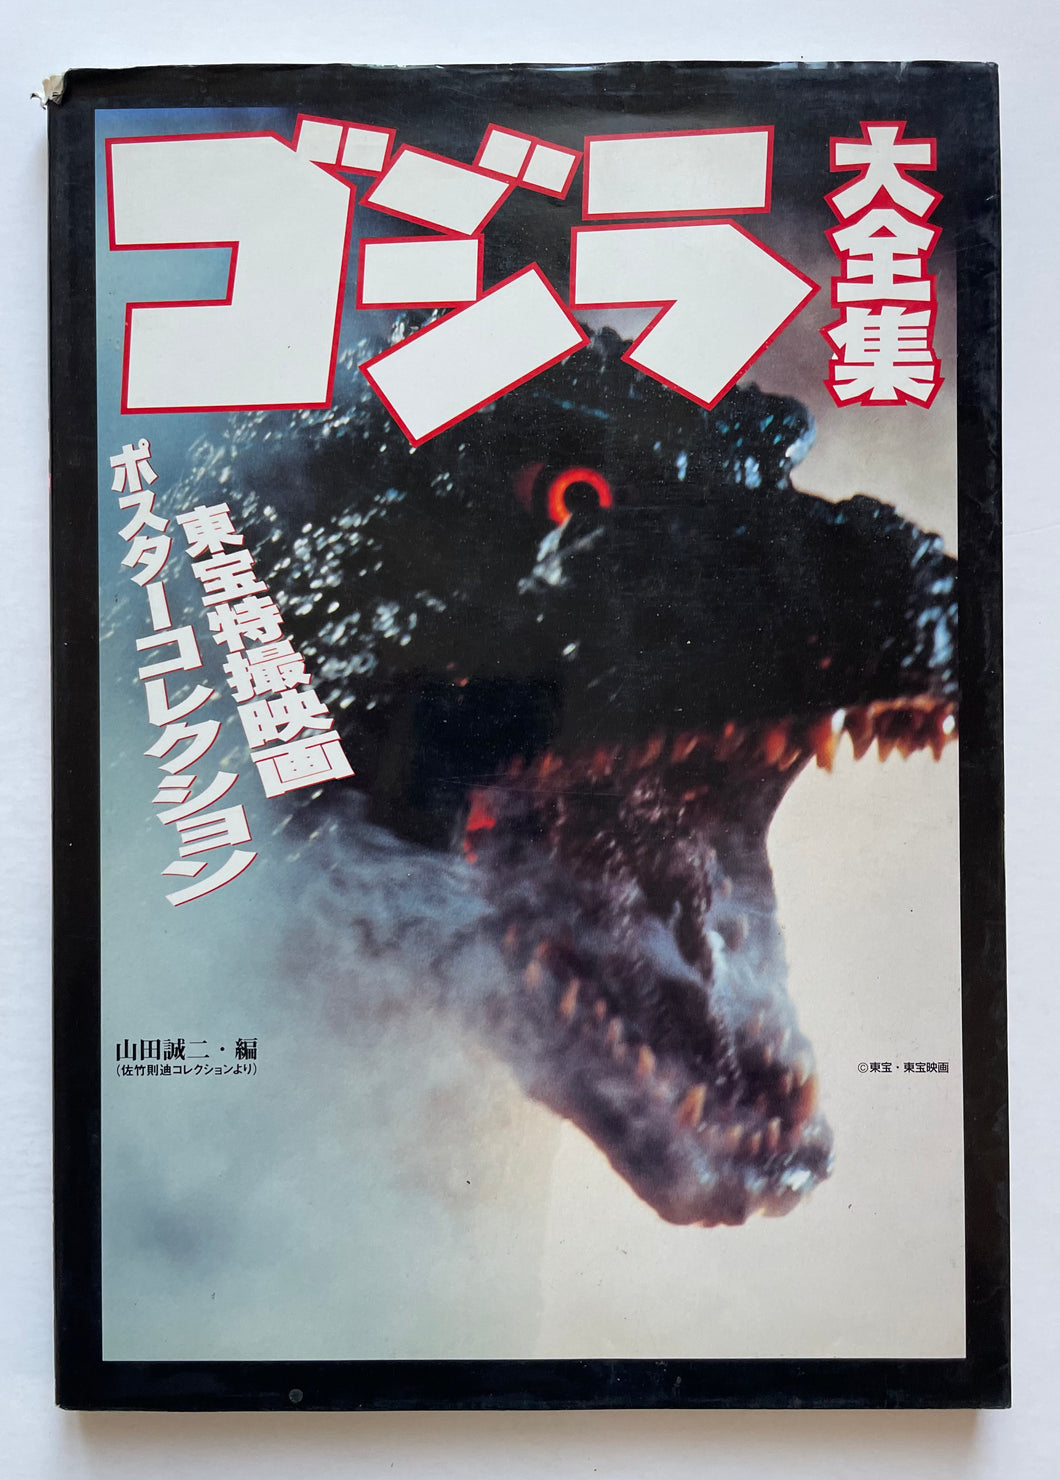 Godzilla Complete Works - Toho special effects movie poster collection | Seiji Yamada (Data House)